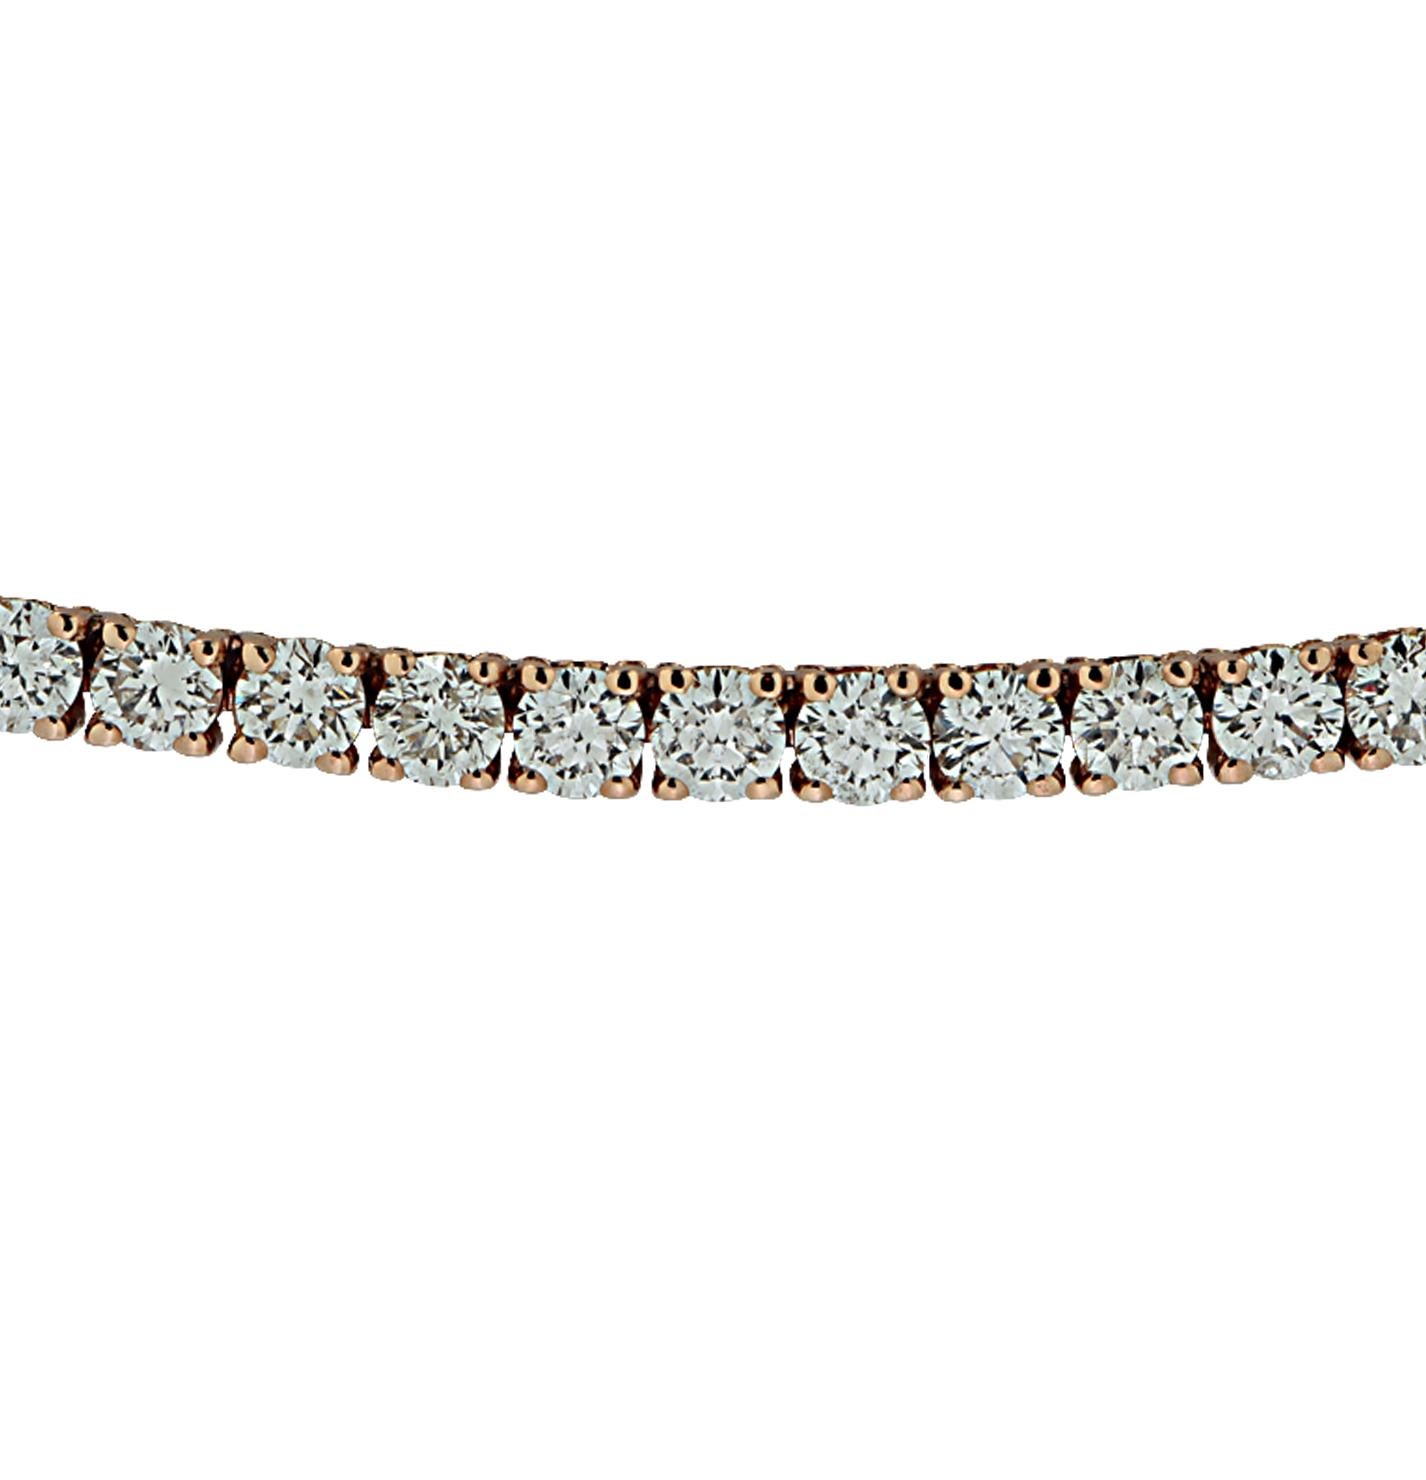 Exquisite Vivid Diamonds Straight Line diamond tennis necklace crafted in Rose Gold, showcasing 150 round brilliant cut diamonds weighing 10.95 carats, G-H color, VS-SI Clarity. Each diamond was carefully selected, perfectly matched and set in a